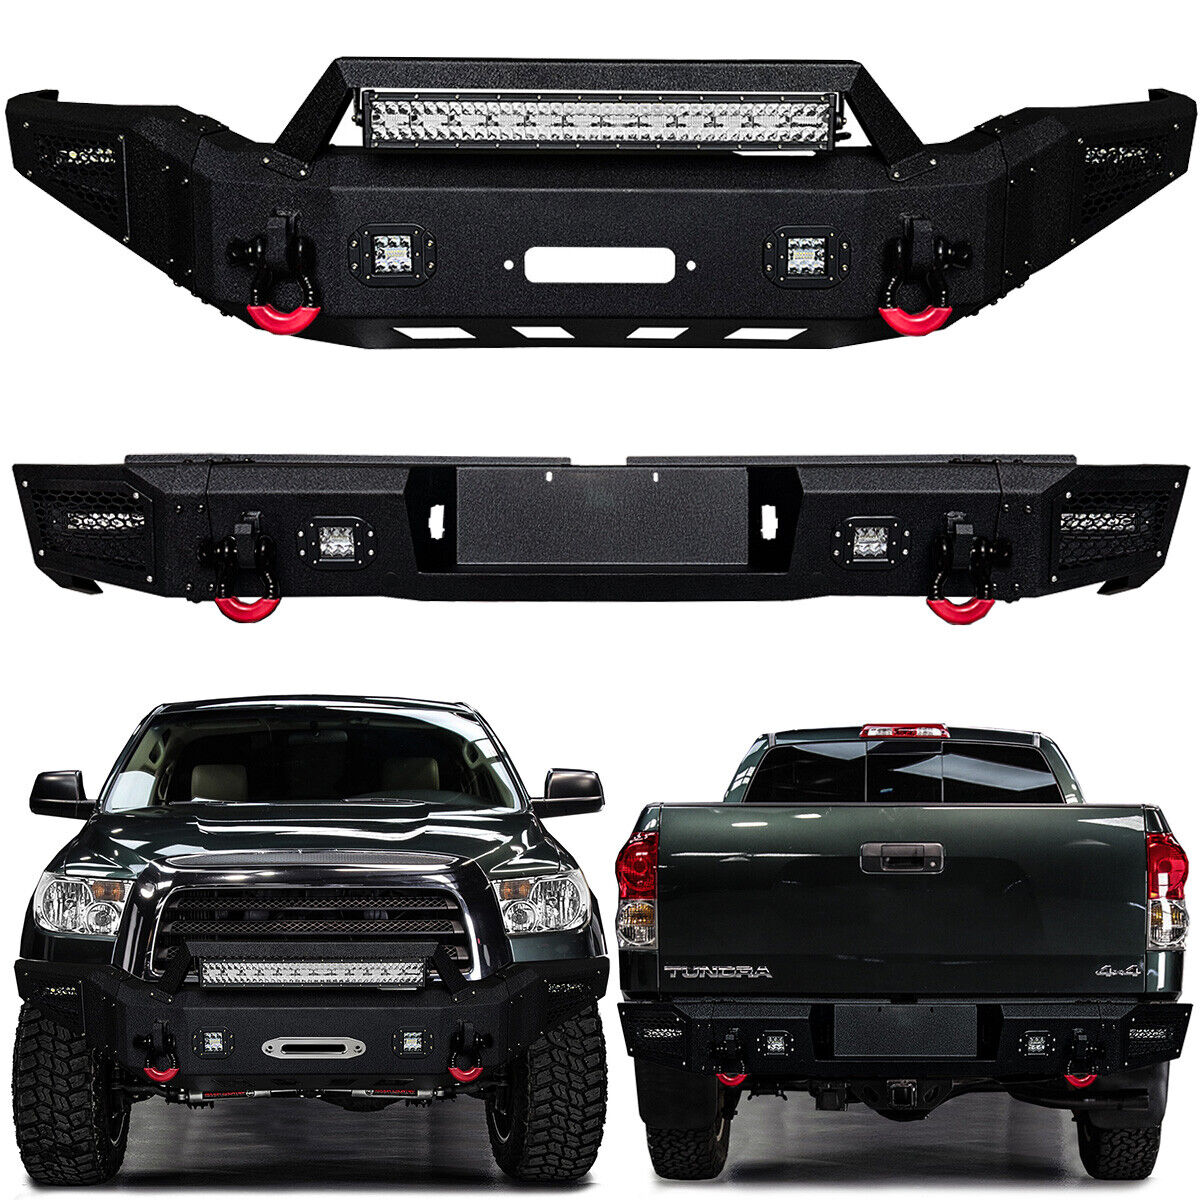 Vijay For 2nd Gen Tundra 2007-2013 Front Bumper and Rear Bumper w/LED Lights